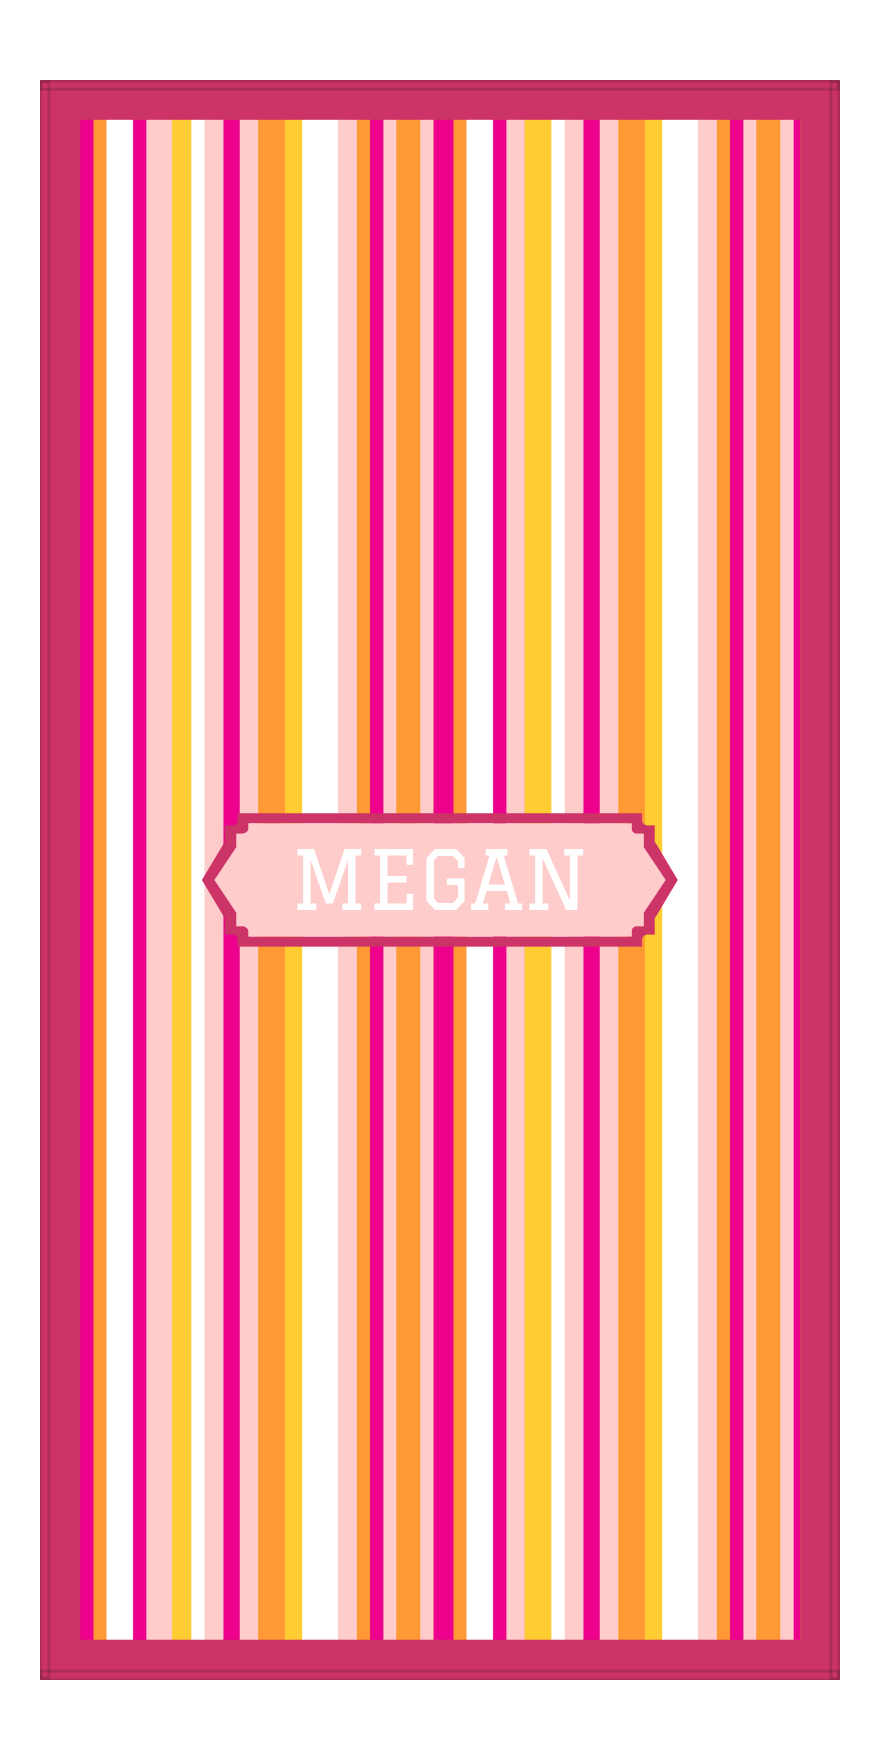 Personalized 5 Color Stripes 2 Repeat Beach Towel - Vertical - Pink and Orange - Oblong Frame - Front View